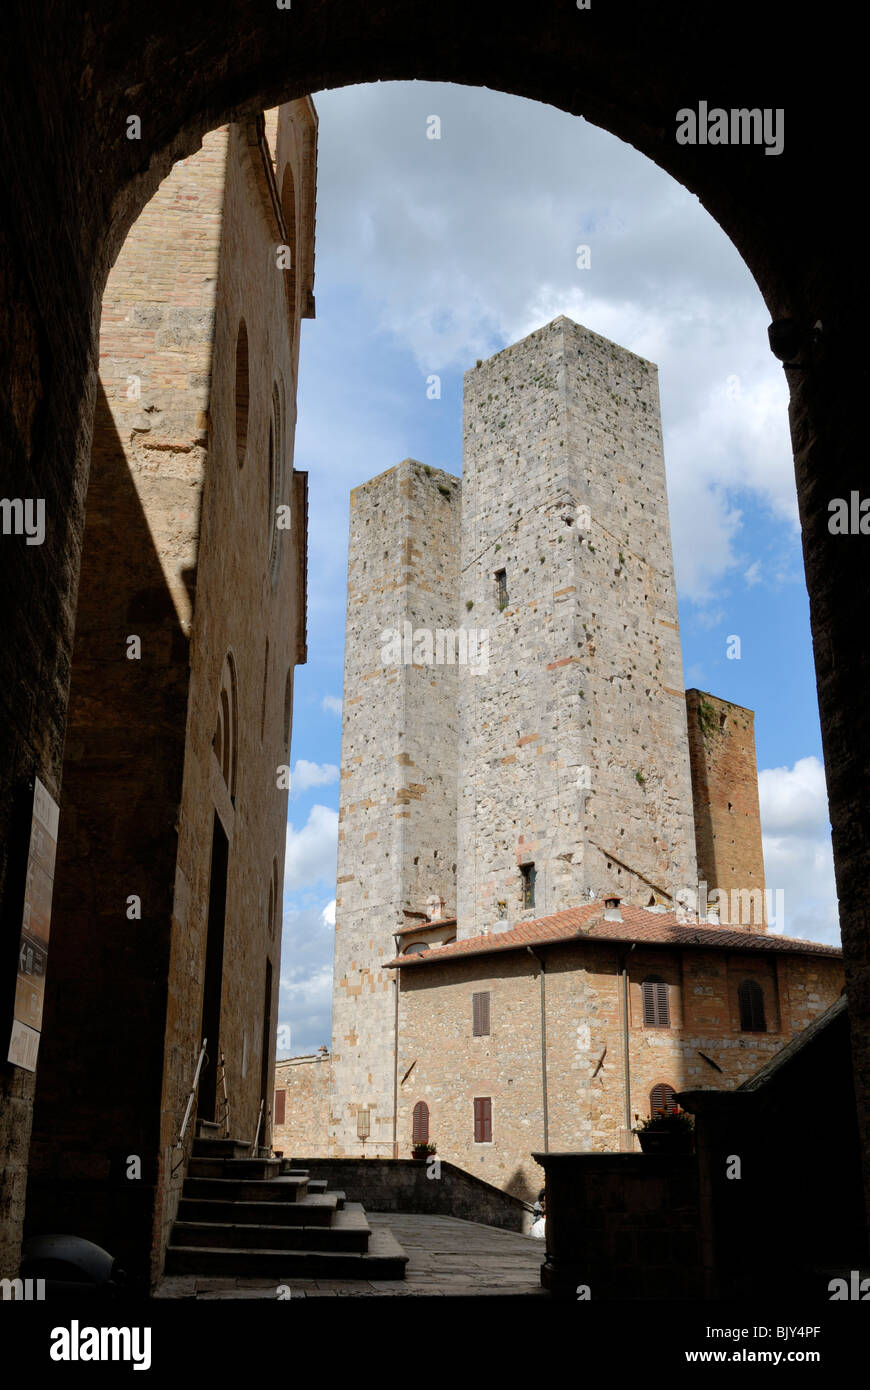 San Gimignano is a medieval Manhattan of the Tuscany. Only 14 towers of the original 76 have survived. These tall towers are ... Stock Photo